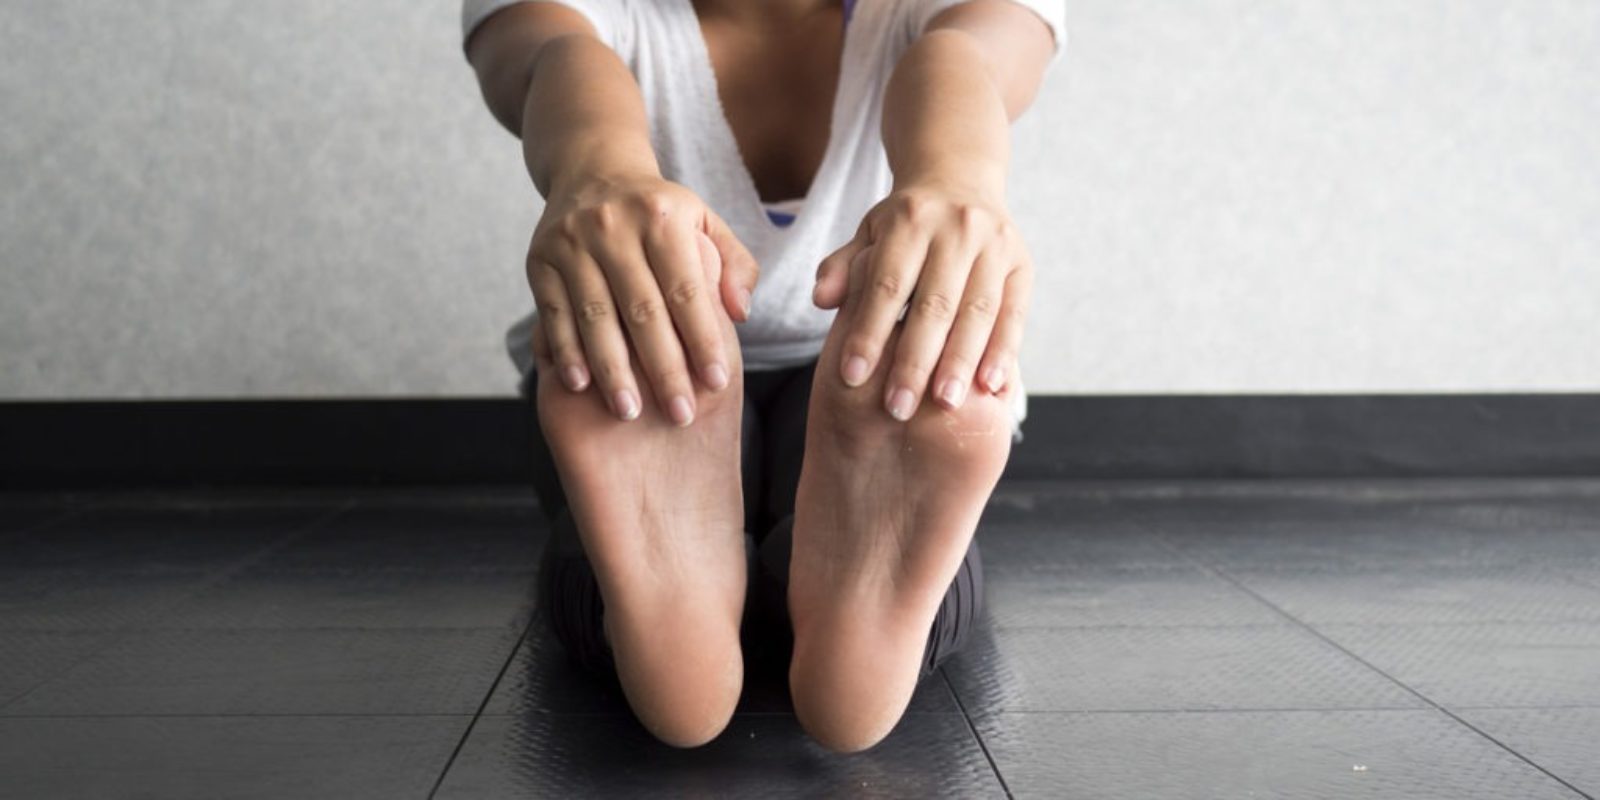 young woman sitting of floor with legs extended while holding toes to stretch hamstrings